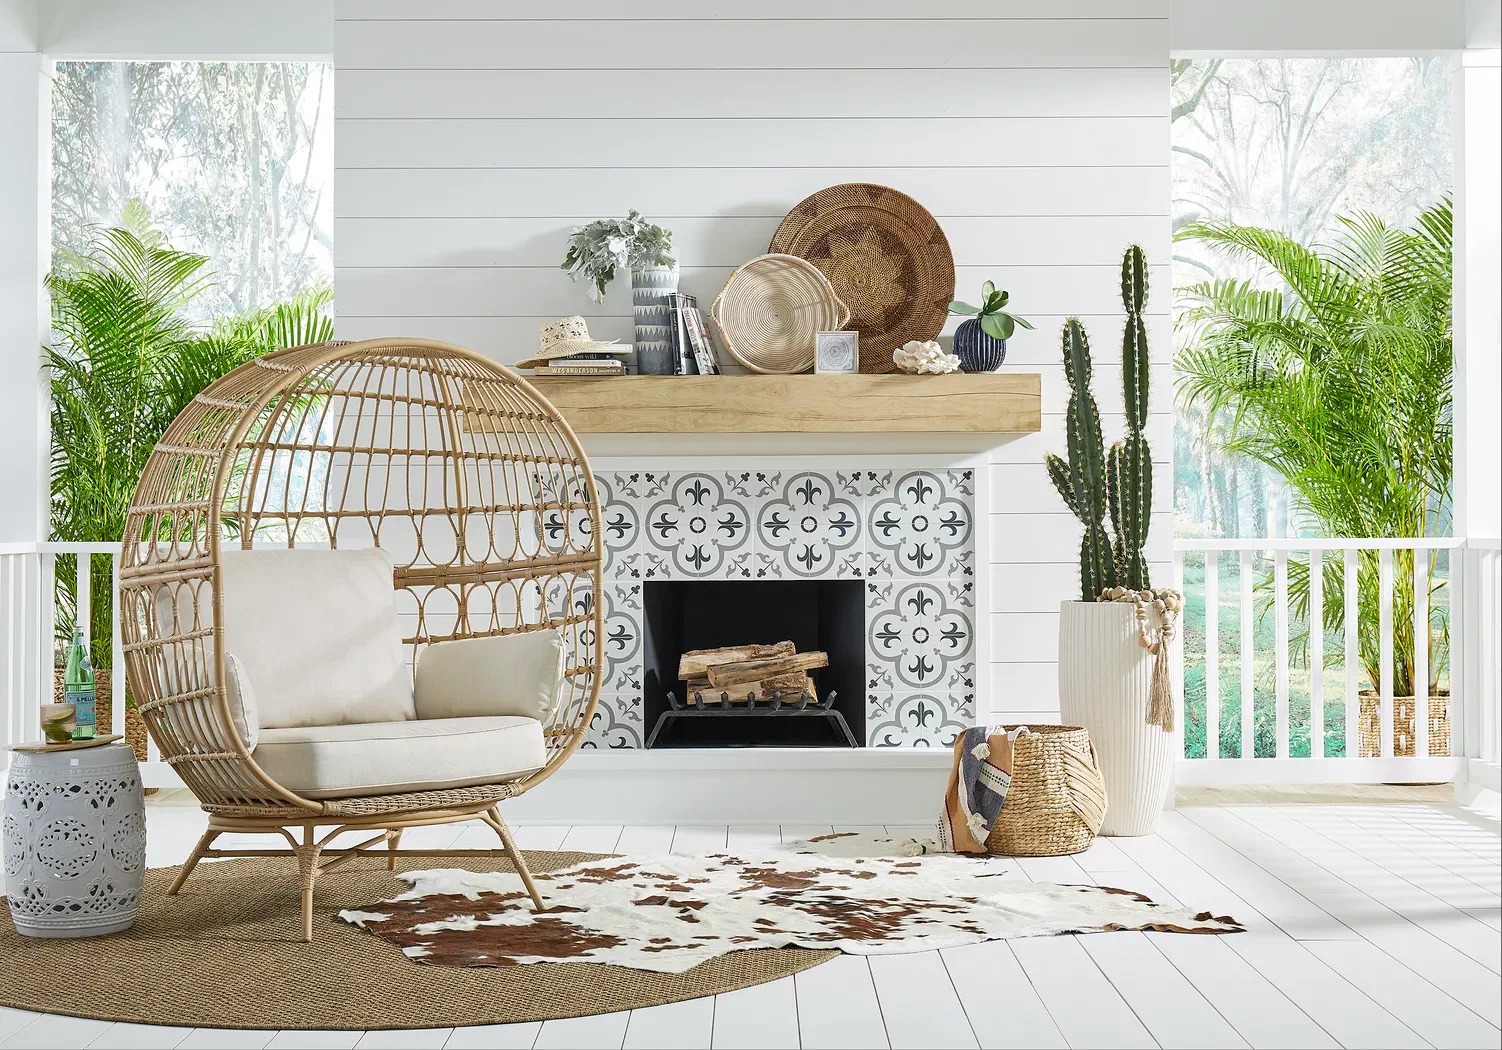 white egg chair with wicker frame